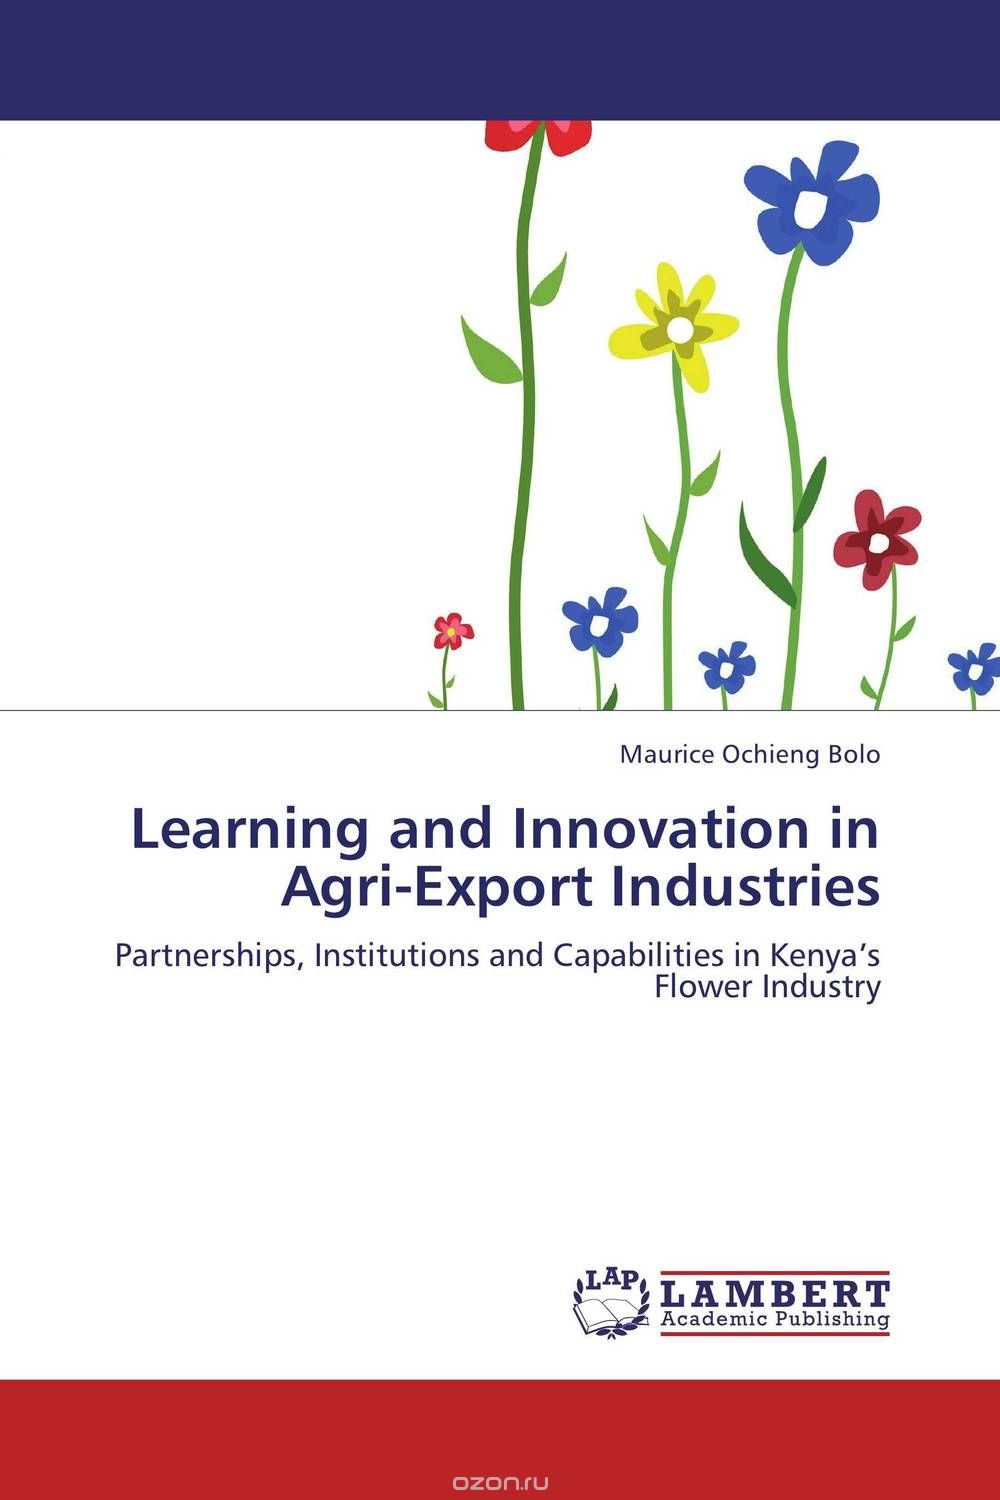 Скачать книгу "Learning and Innovation in Agri-Export Industries"